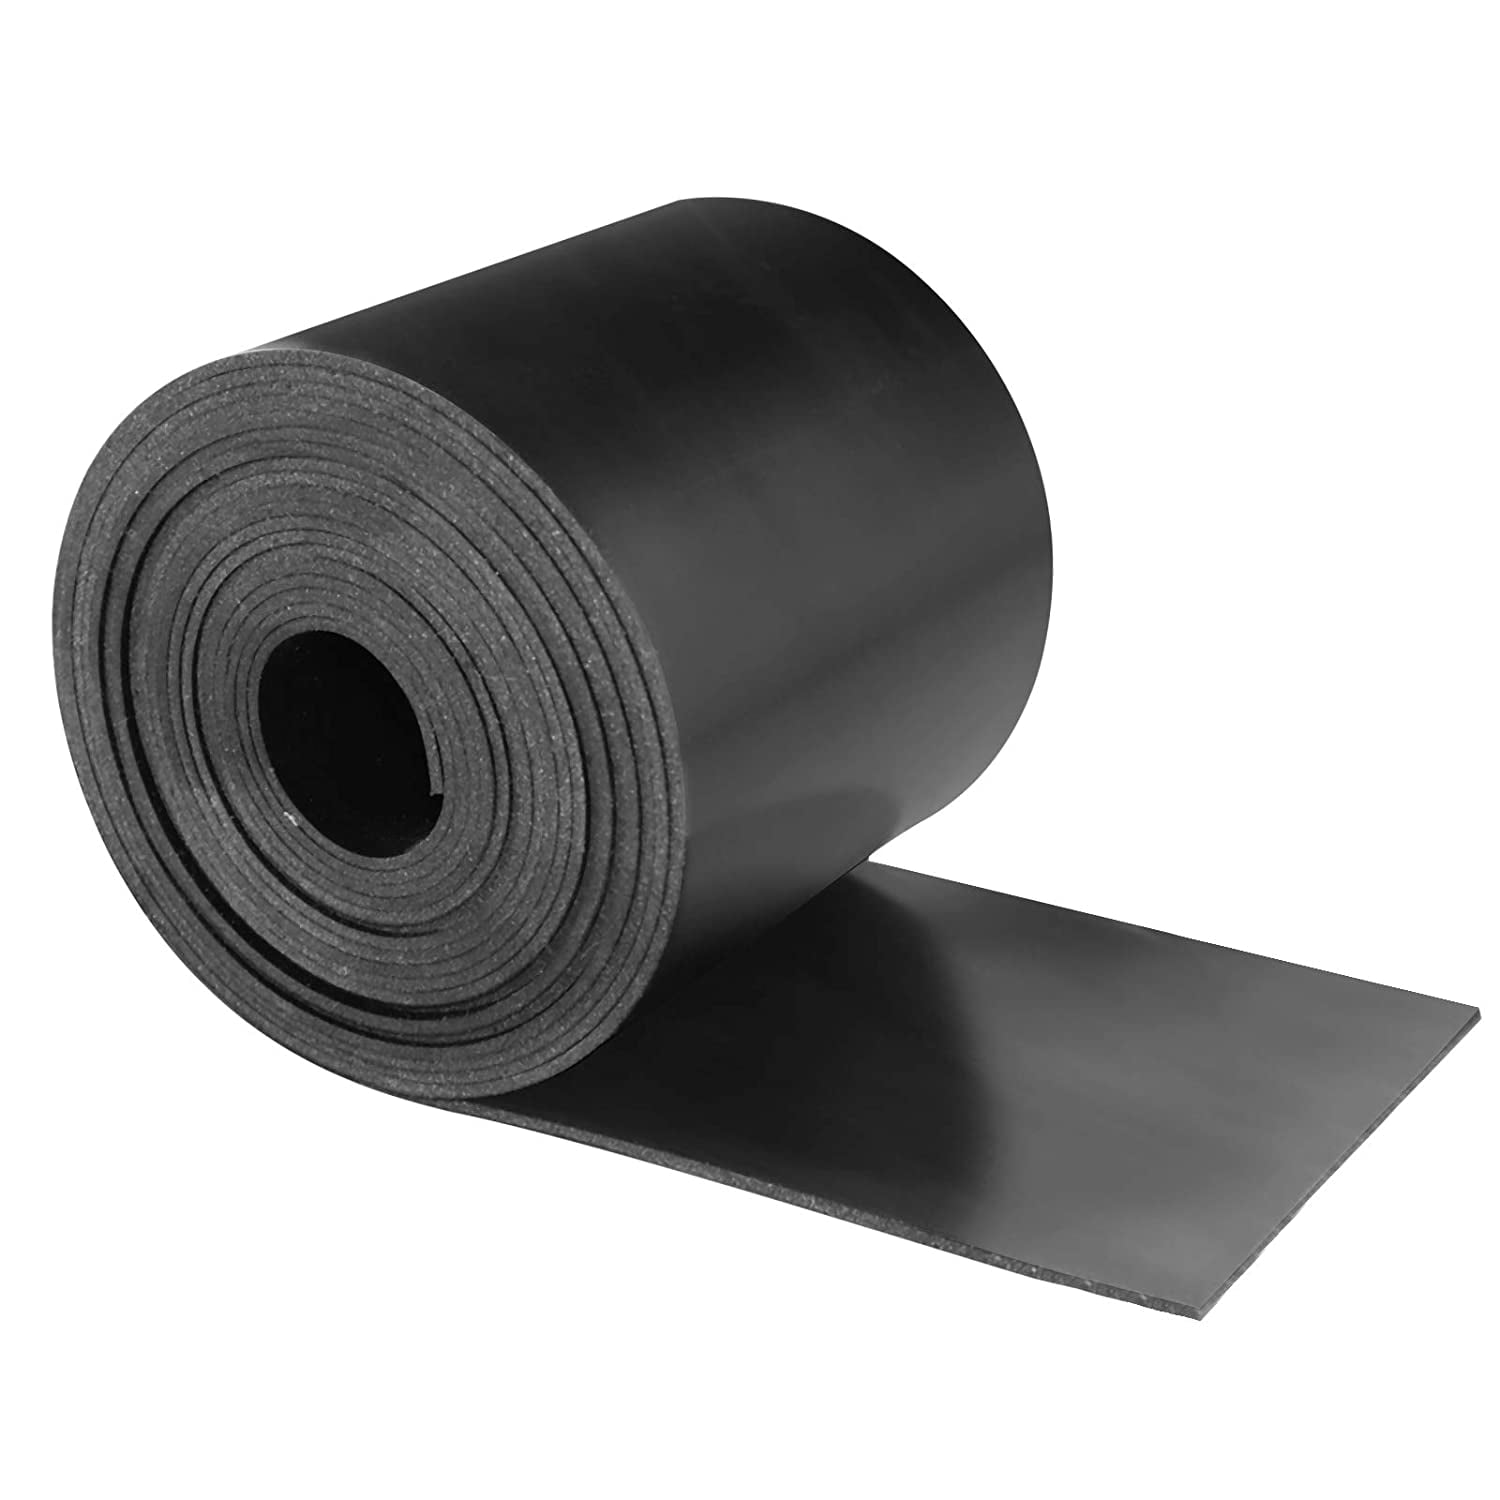 Crafts Seals Supports. Flooring Warehouse Pads Neoprene Rubber Strips Solid Rubber Rolls Neoprene Solid Rubber Sheet for DIY Gasket W:3.2In x T: 1/8In x L: 10Ft Weather Stripping